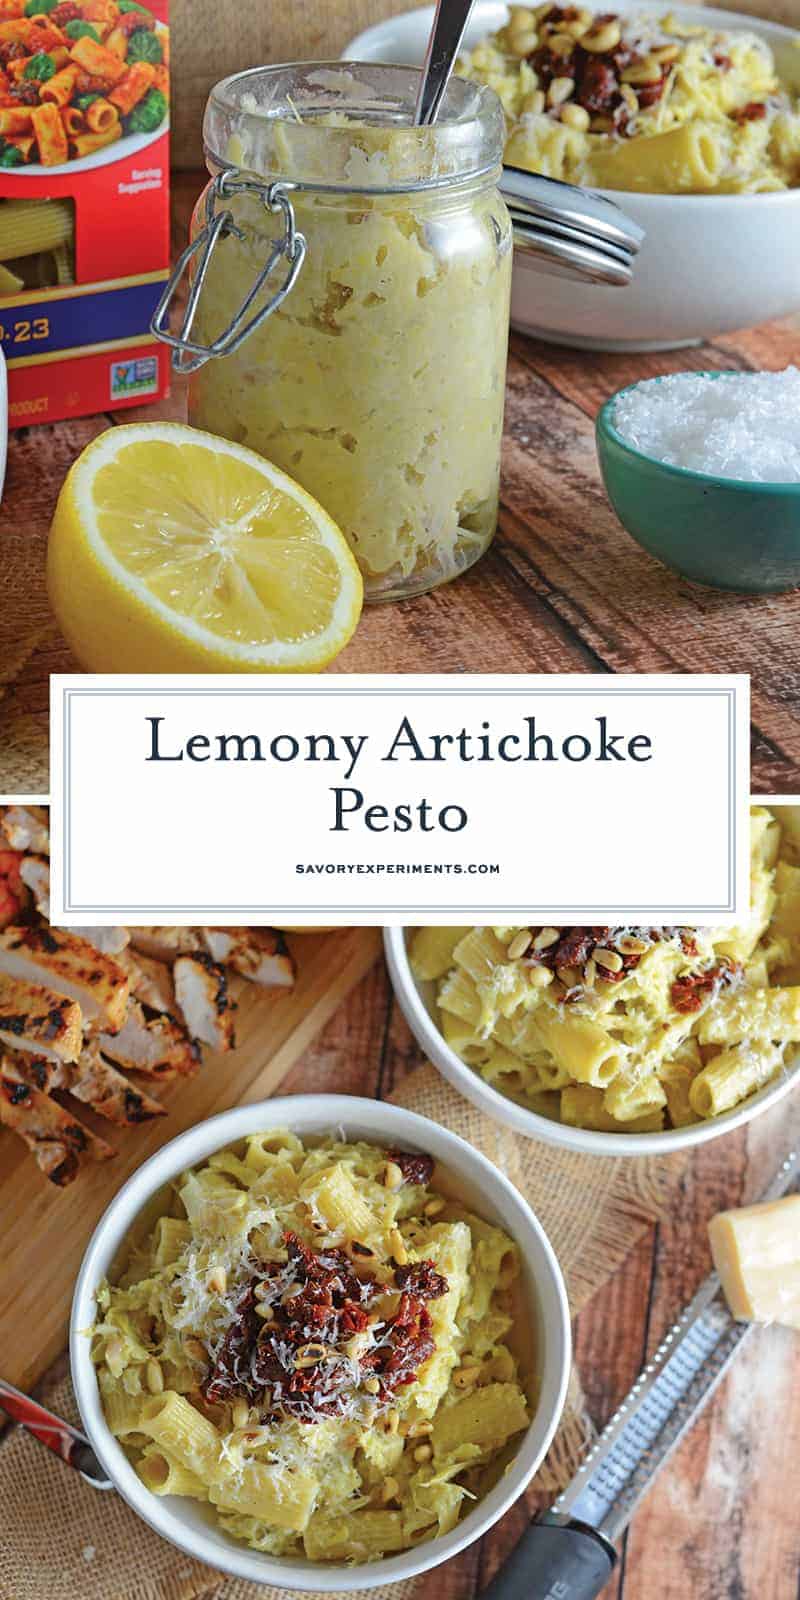 Lemony Artichoke Pesto is a fresh and punchy sauce perfect for summer meals and pasta. Takes only minutes to make, stores and freezes well and makes an excellent gift. Top with pine nuts, sun dried tomatoes and Parmesan Reggiano cheese. #homemadepestosauce #artichokes www.savoryexperiments.com